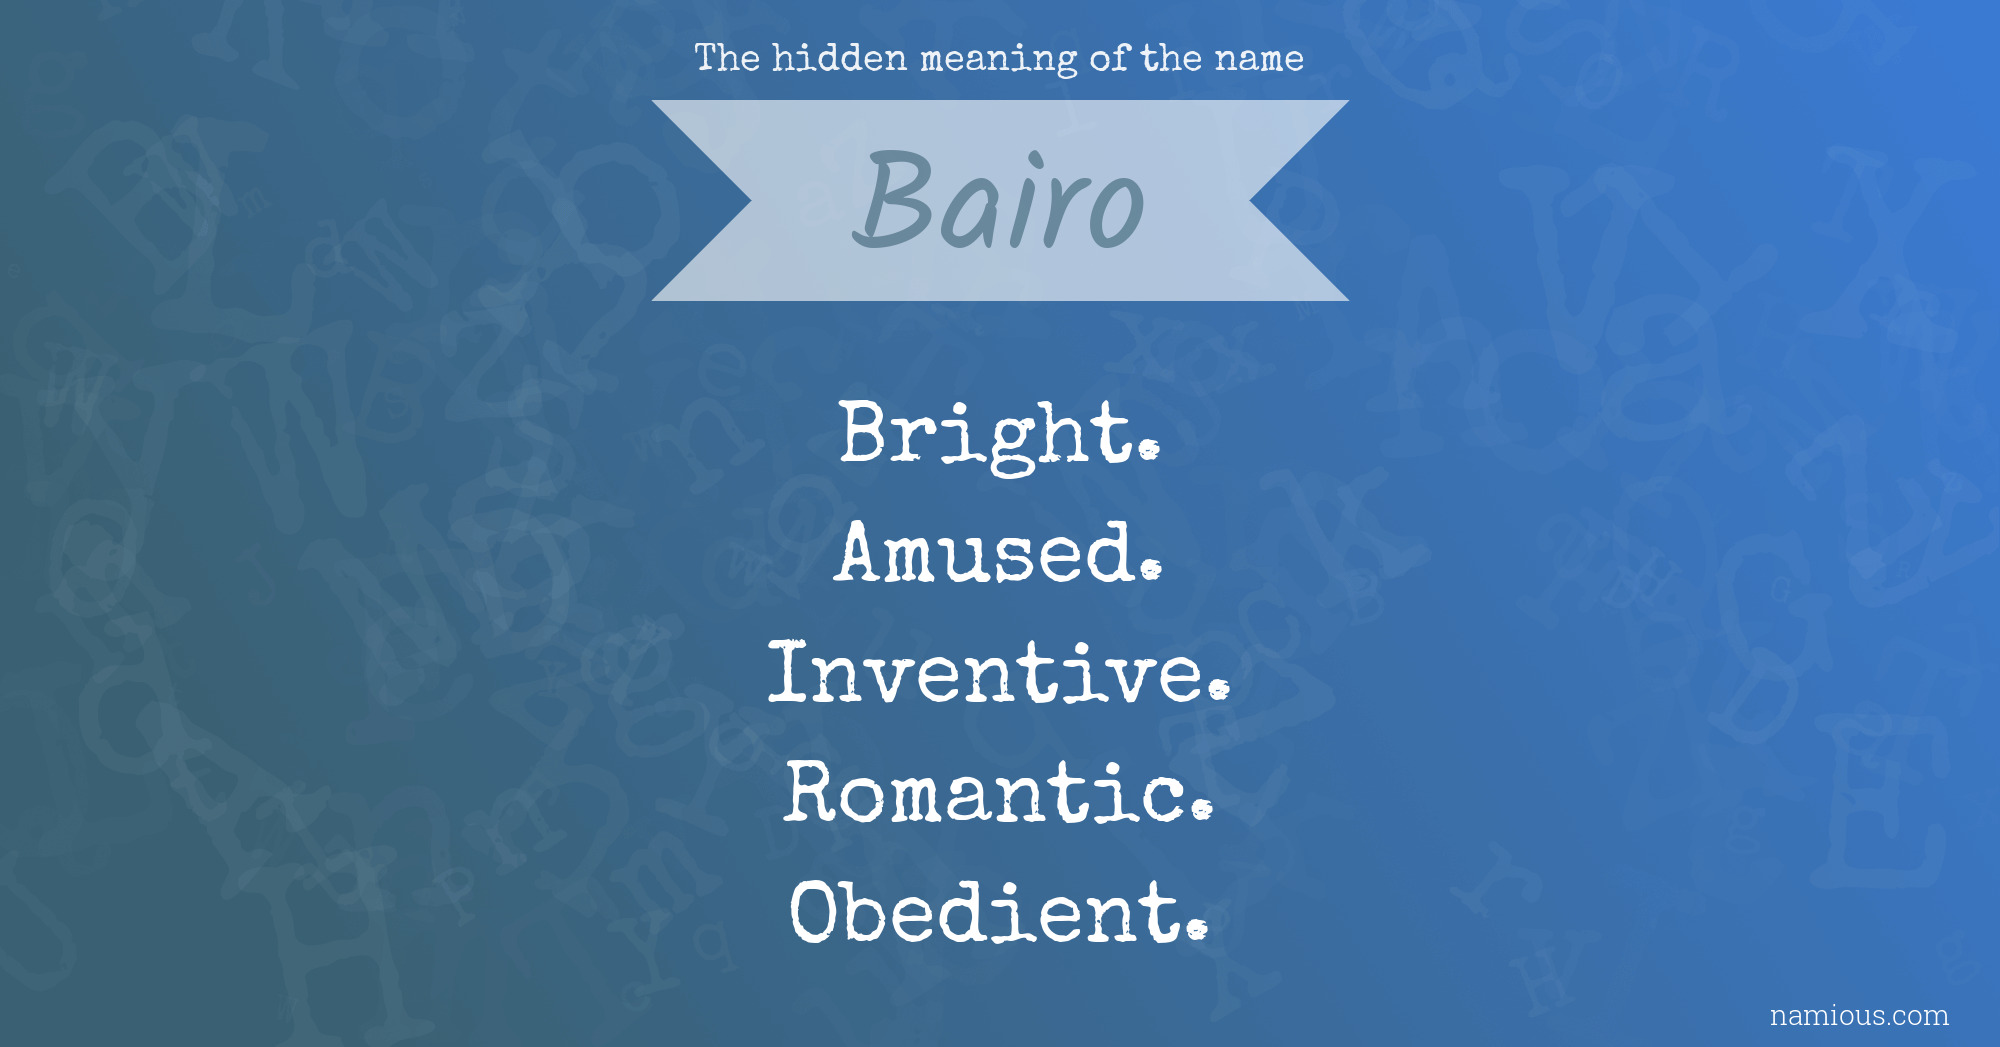 The hidden meaning of the name Bairo